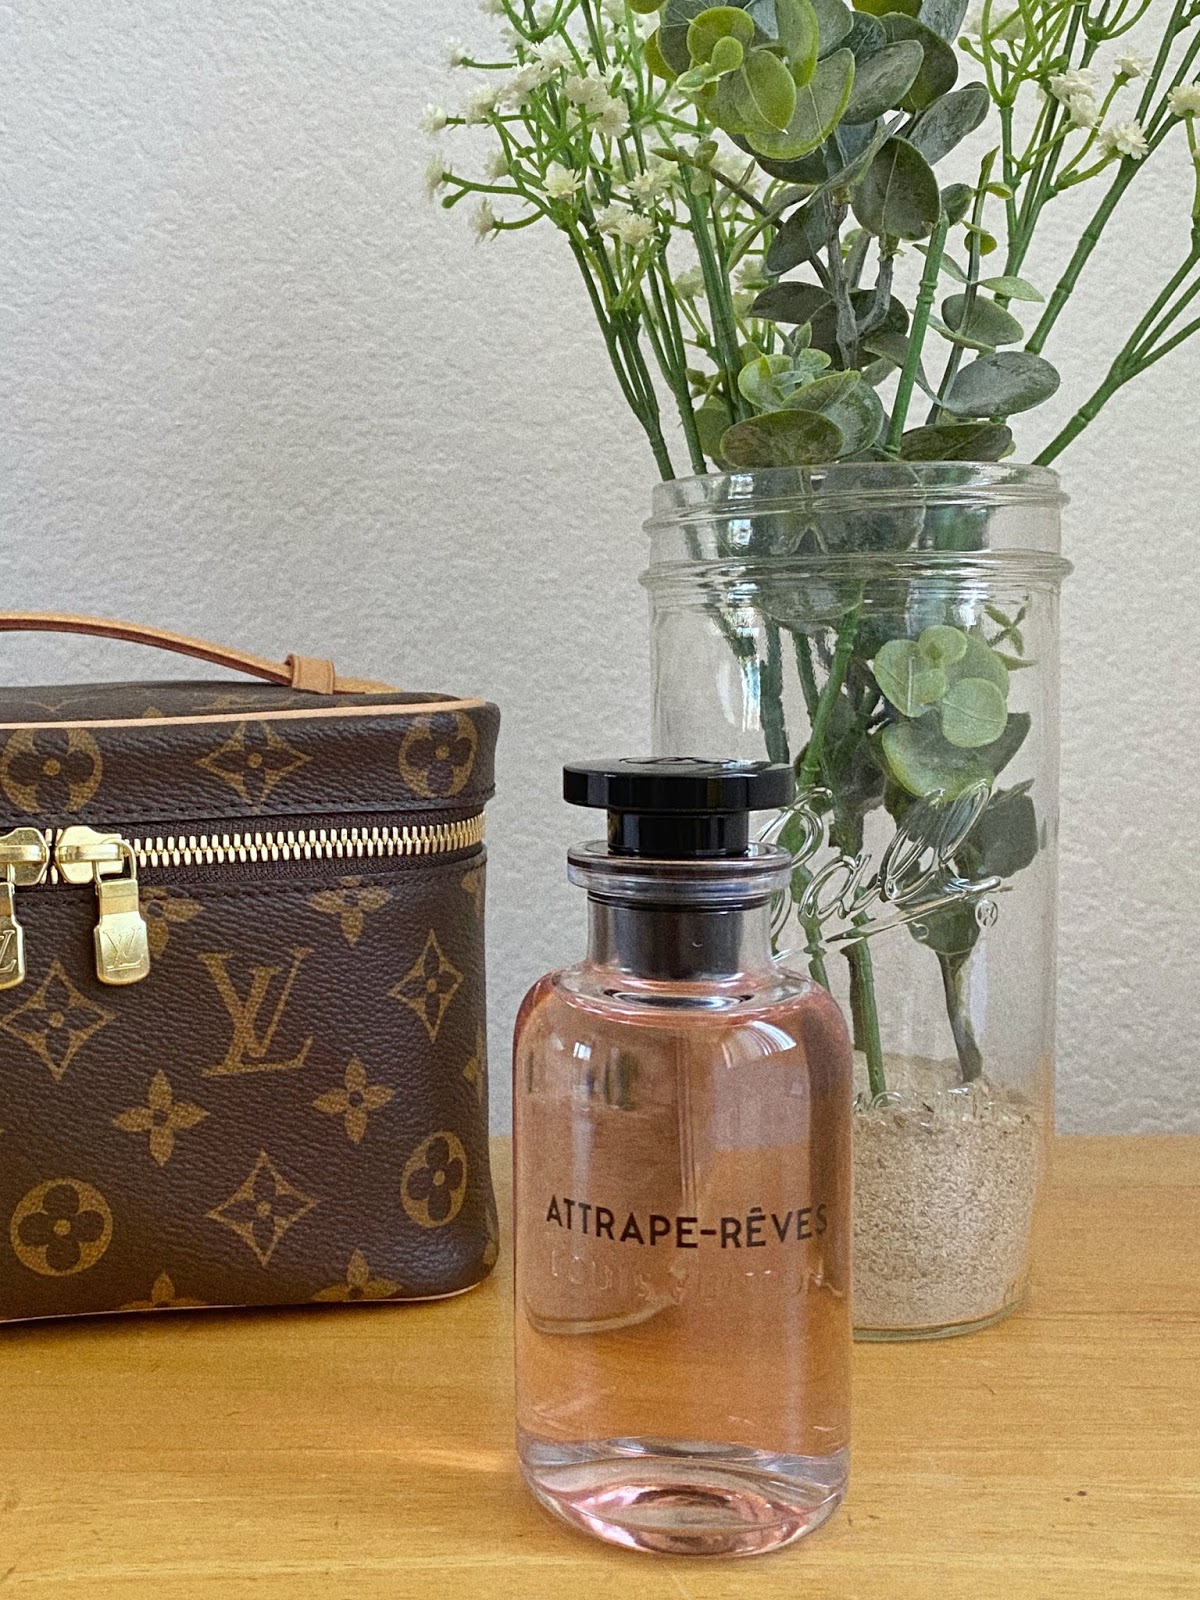 Louis Vuitton Attrape Reves Perfume Added to the collection